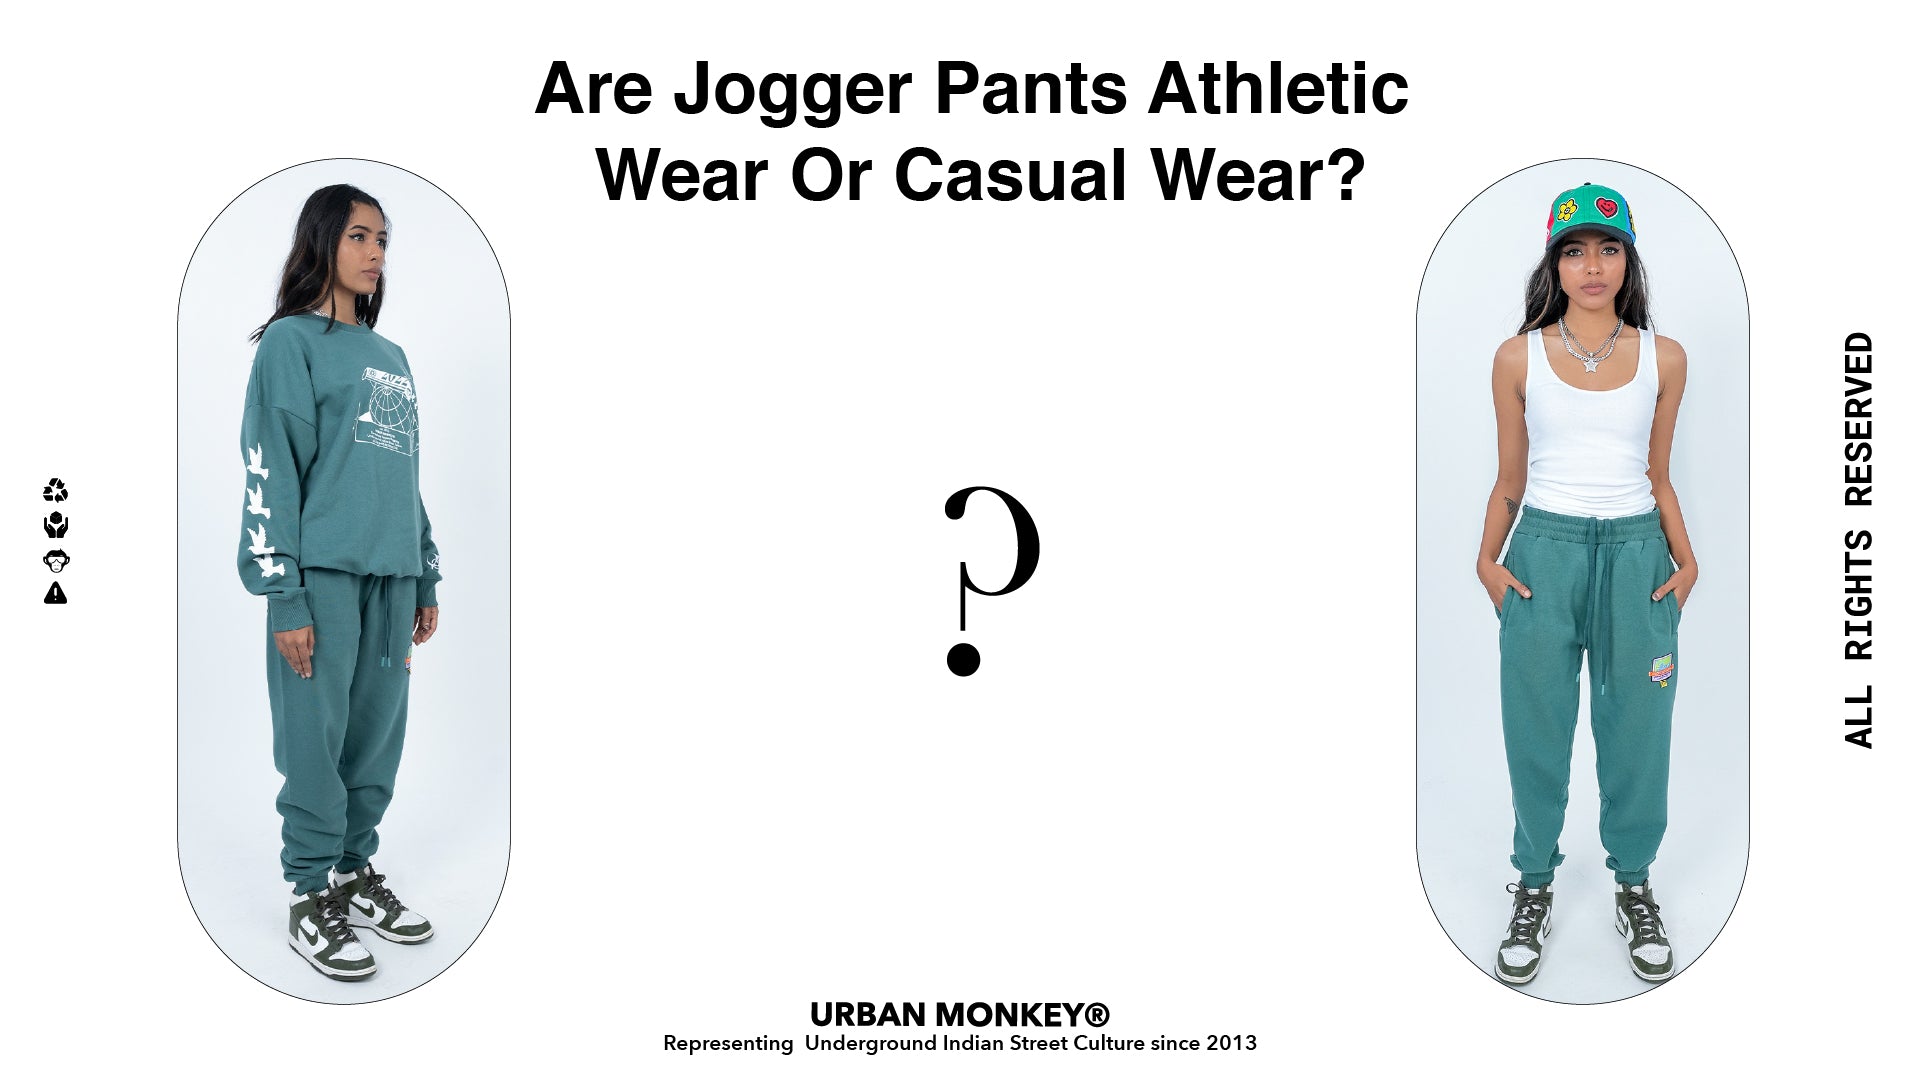 7 Best Jogger pants outfit dressy ideas  jogger pants outfit, casual  outfits, outfits dressy